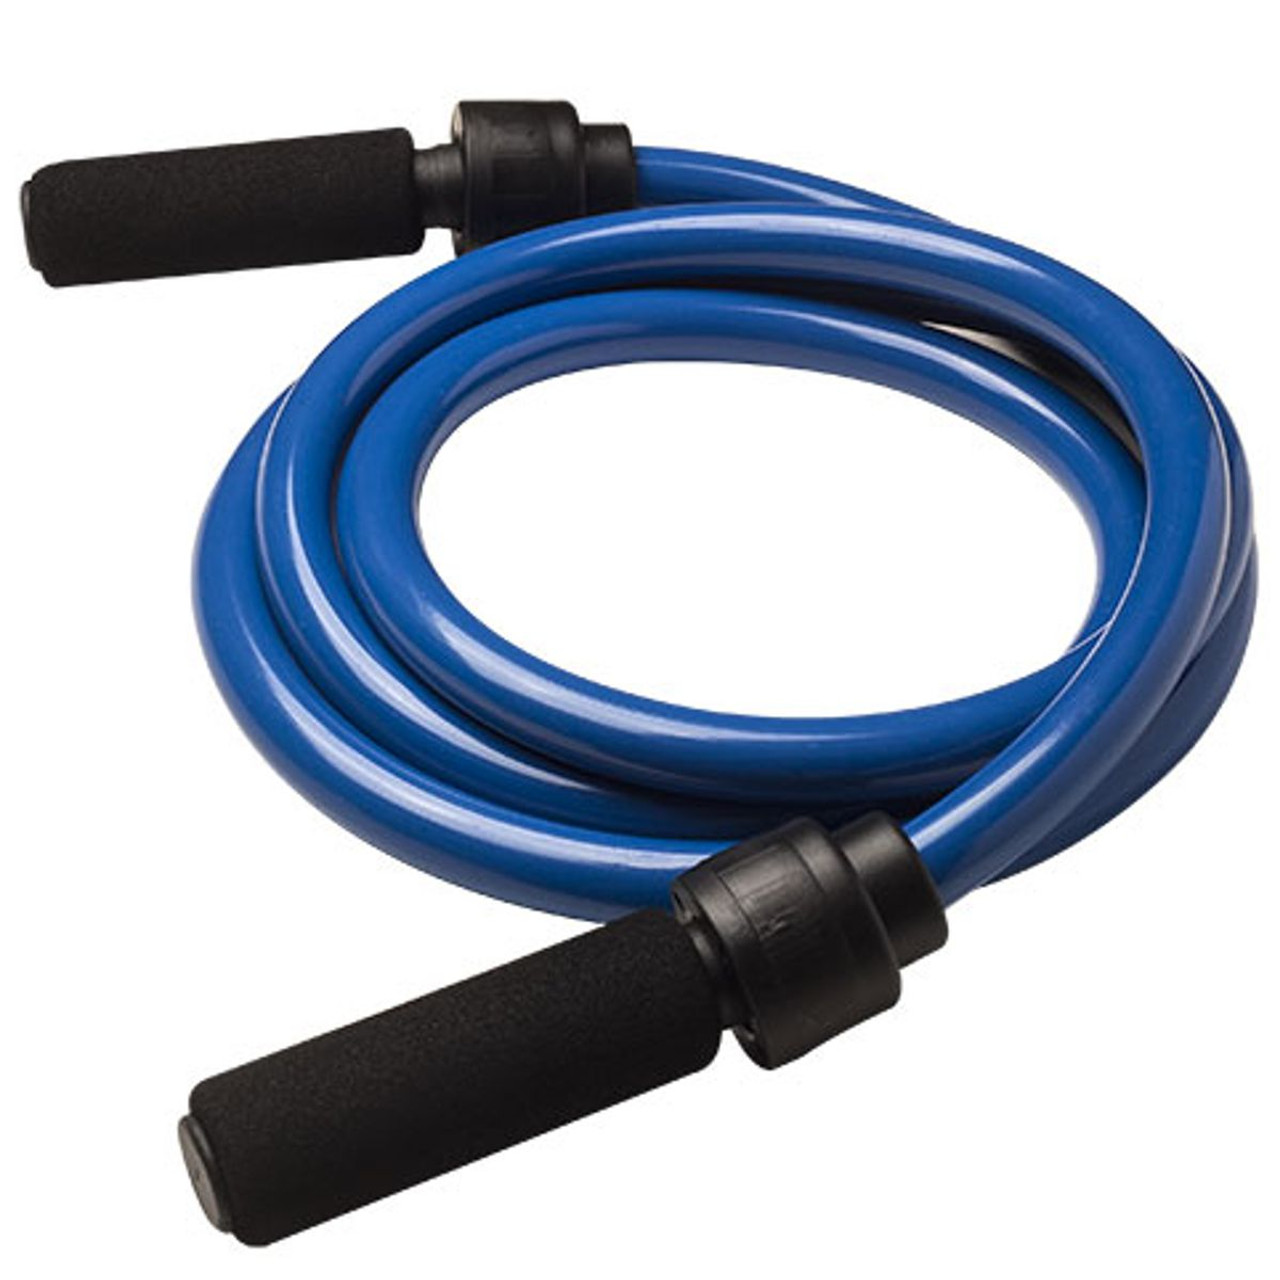 Buy Blue Weighted Jump Rope 4lbs. Online